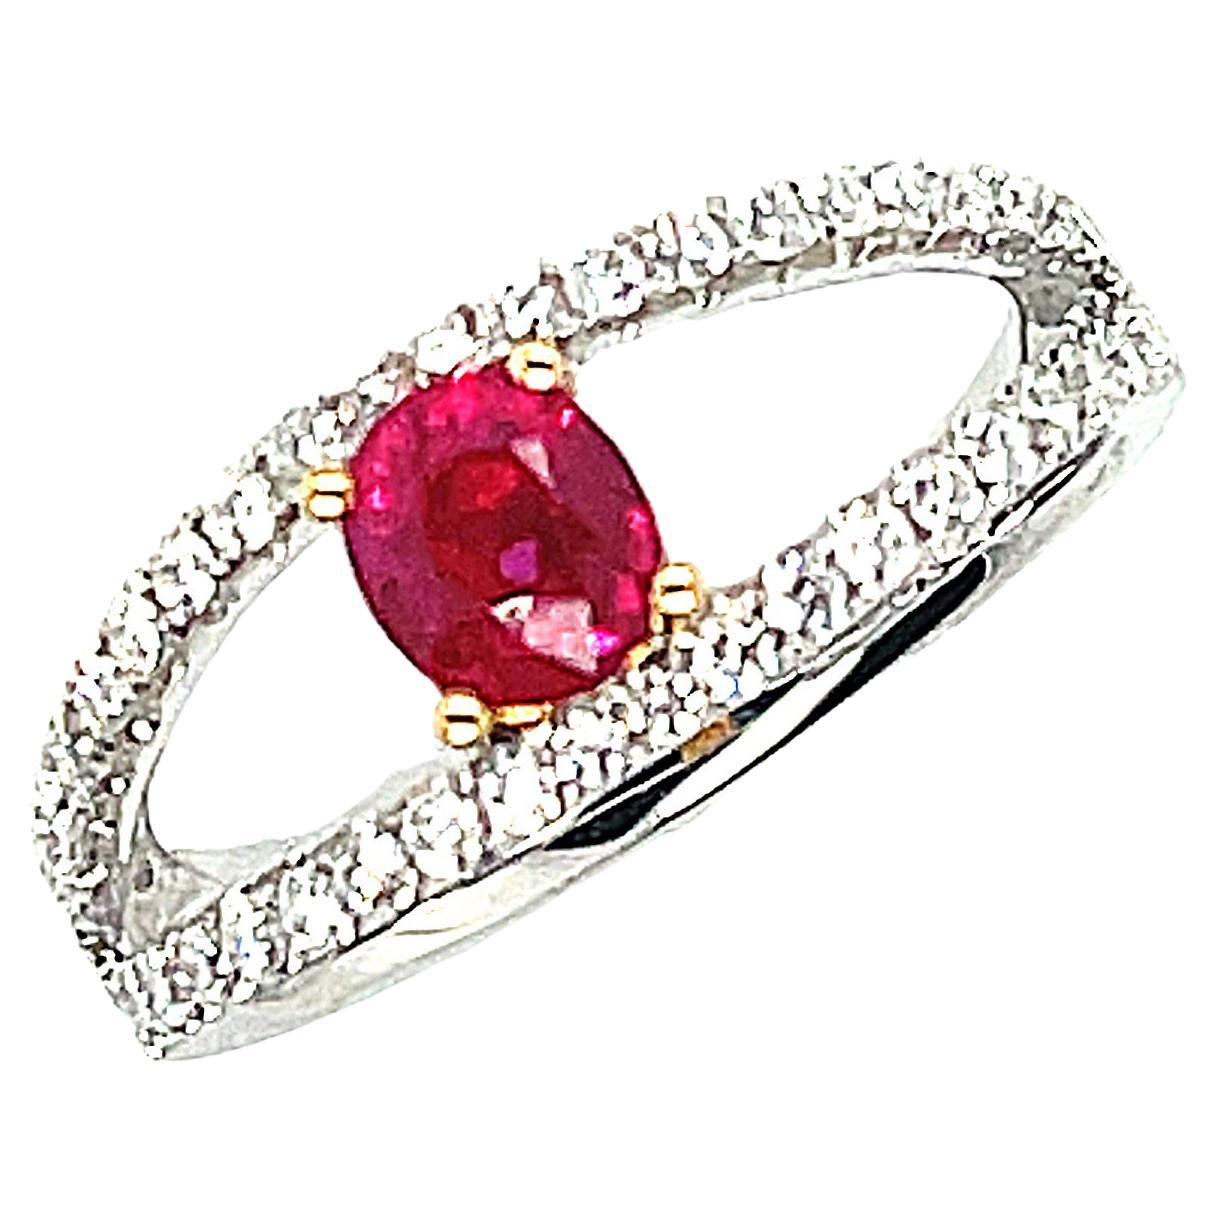 This beautiful cocktail ring features a sparkling red ruby and brilliant-cut diamonds set in 18k white and yellow gold. The ruby weighs .68 carat, has vivid red color, and is so full of life! We have set the ruby in 18k yellow gold, allowing it to